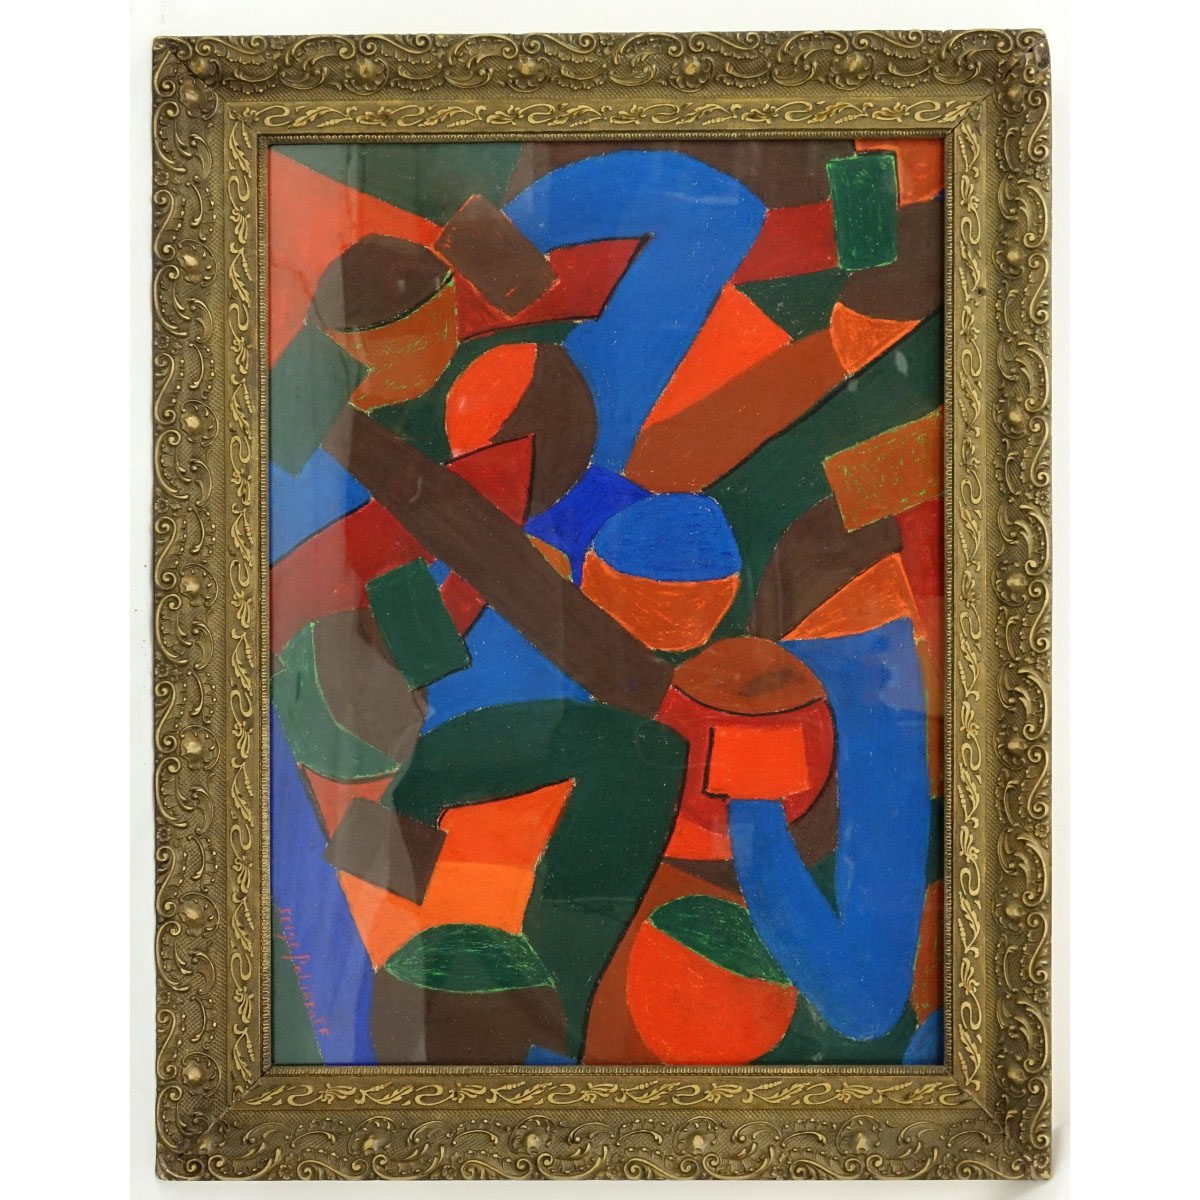 Attributed to: Serge Poliakoff Tempera on paper